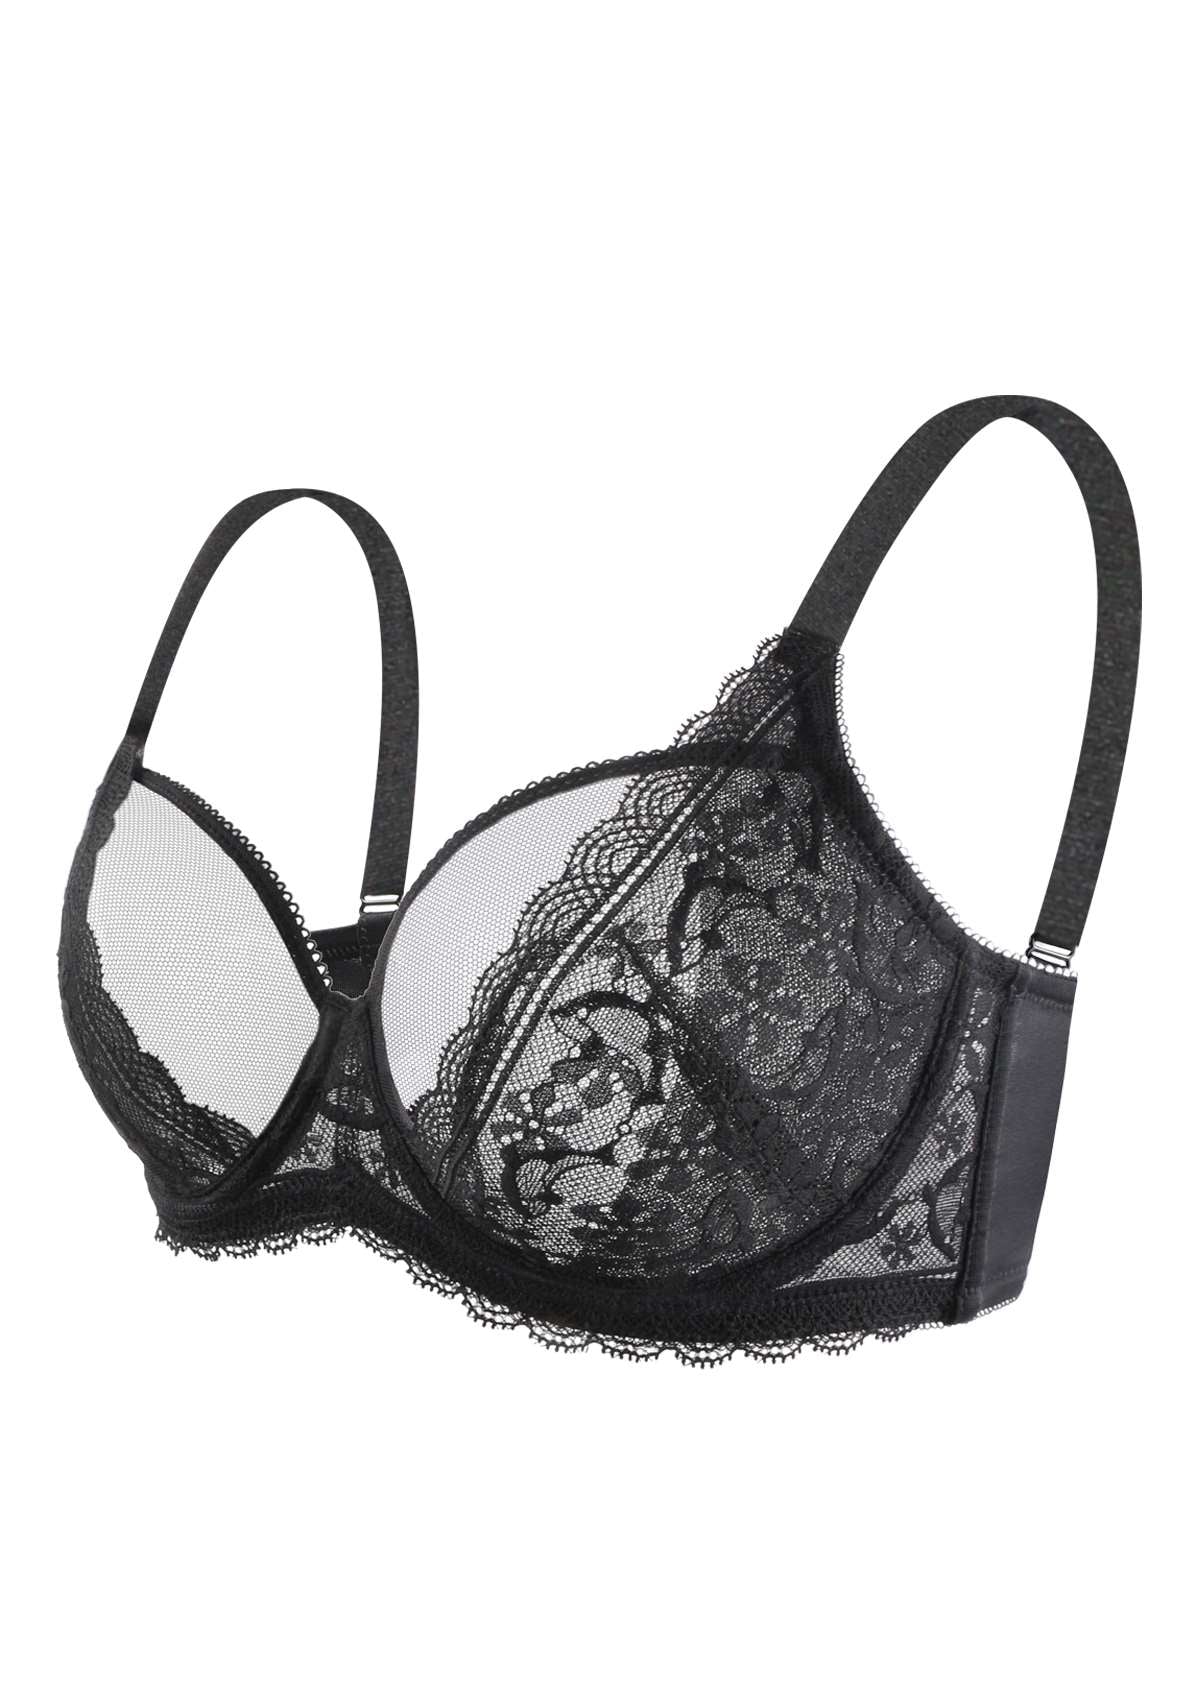 HSIA Anemone Lace Bra And Panties: Back Support Wired Bra - Black / 38 / DD/E